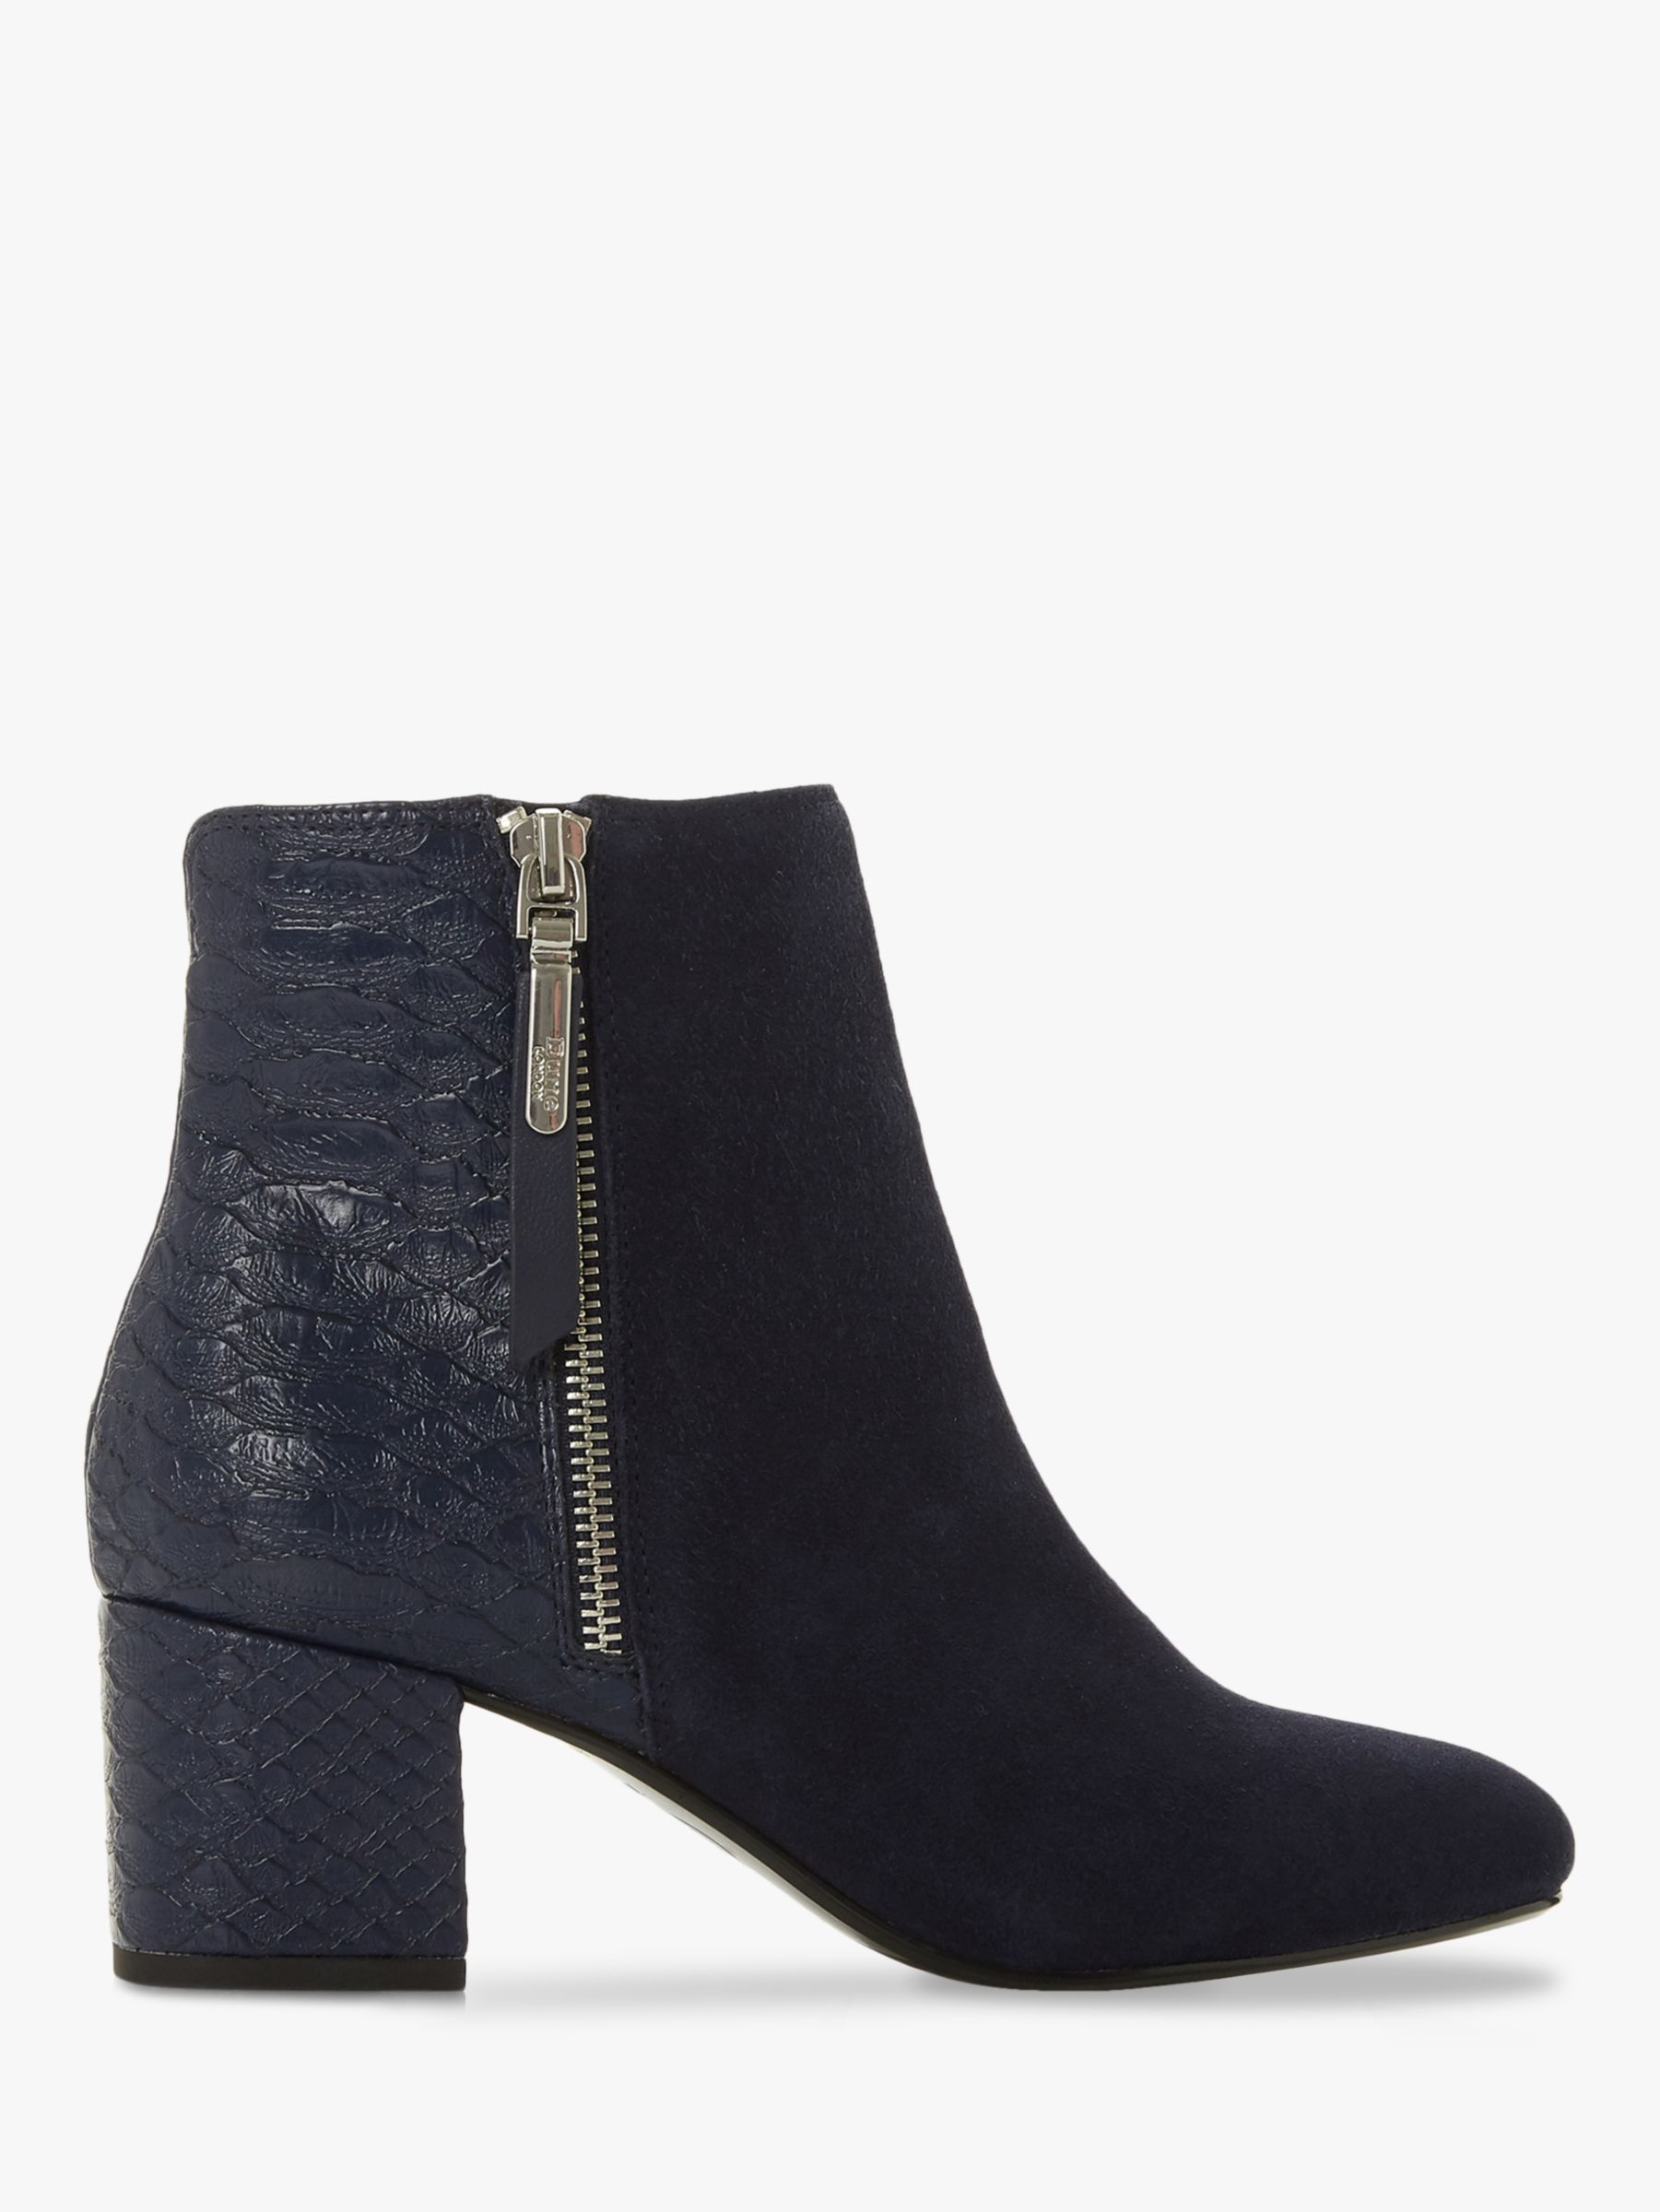 Dune Orlla Side Zip Ankle Boots, Navy Suede at John Lewis & Partners